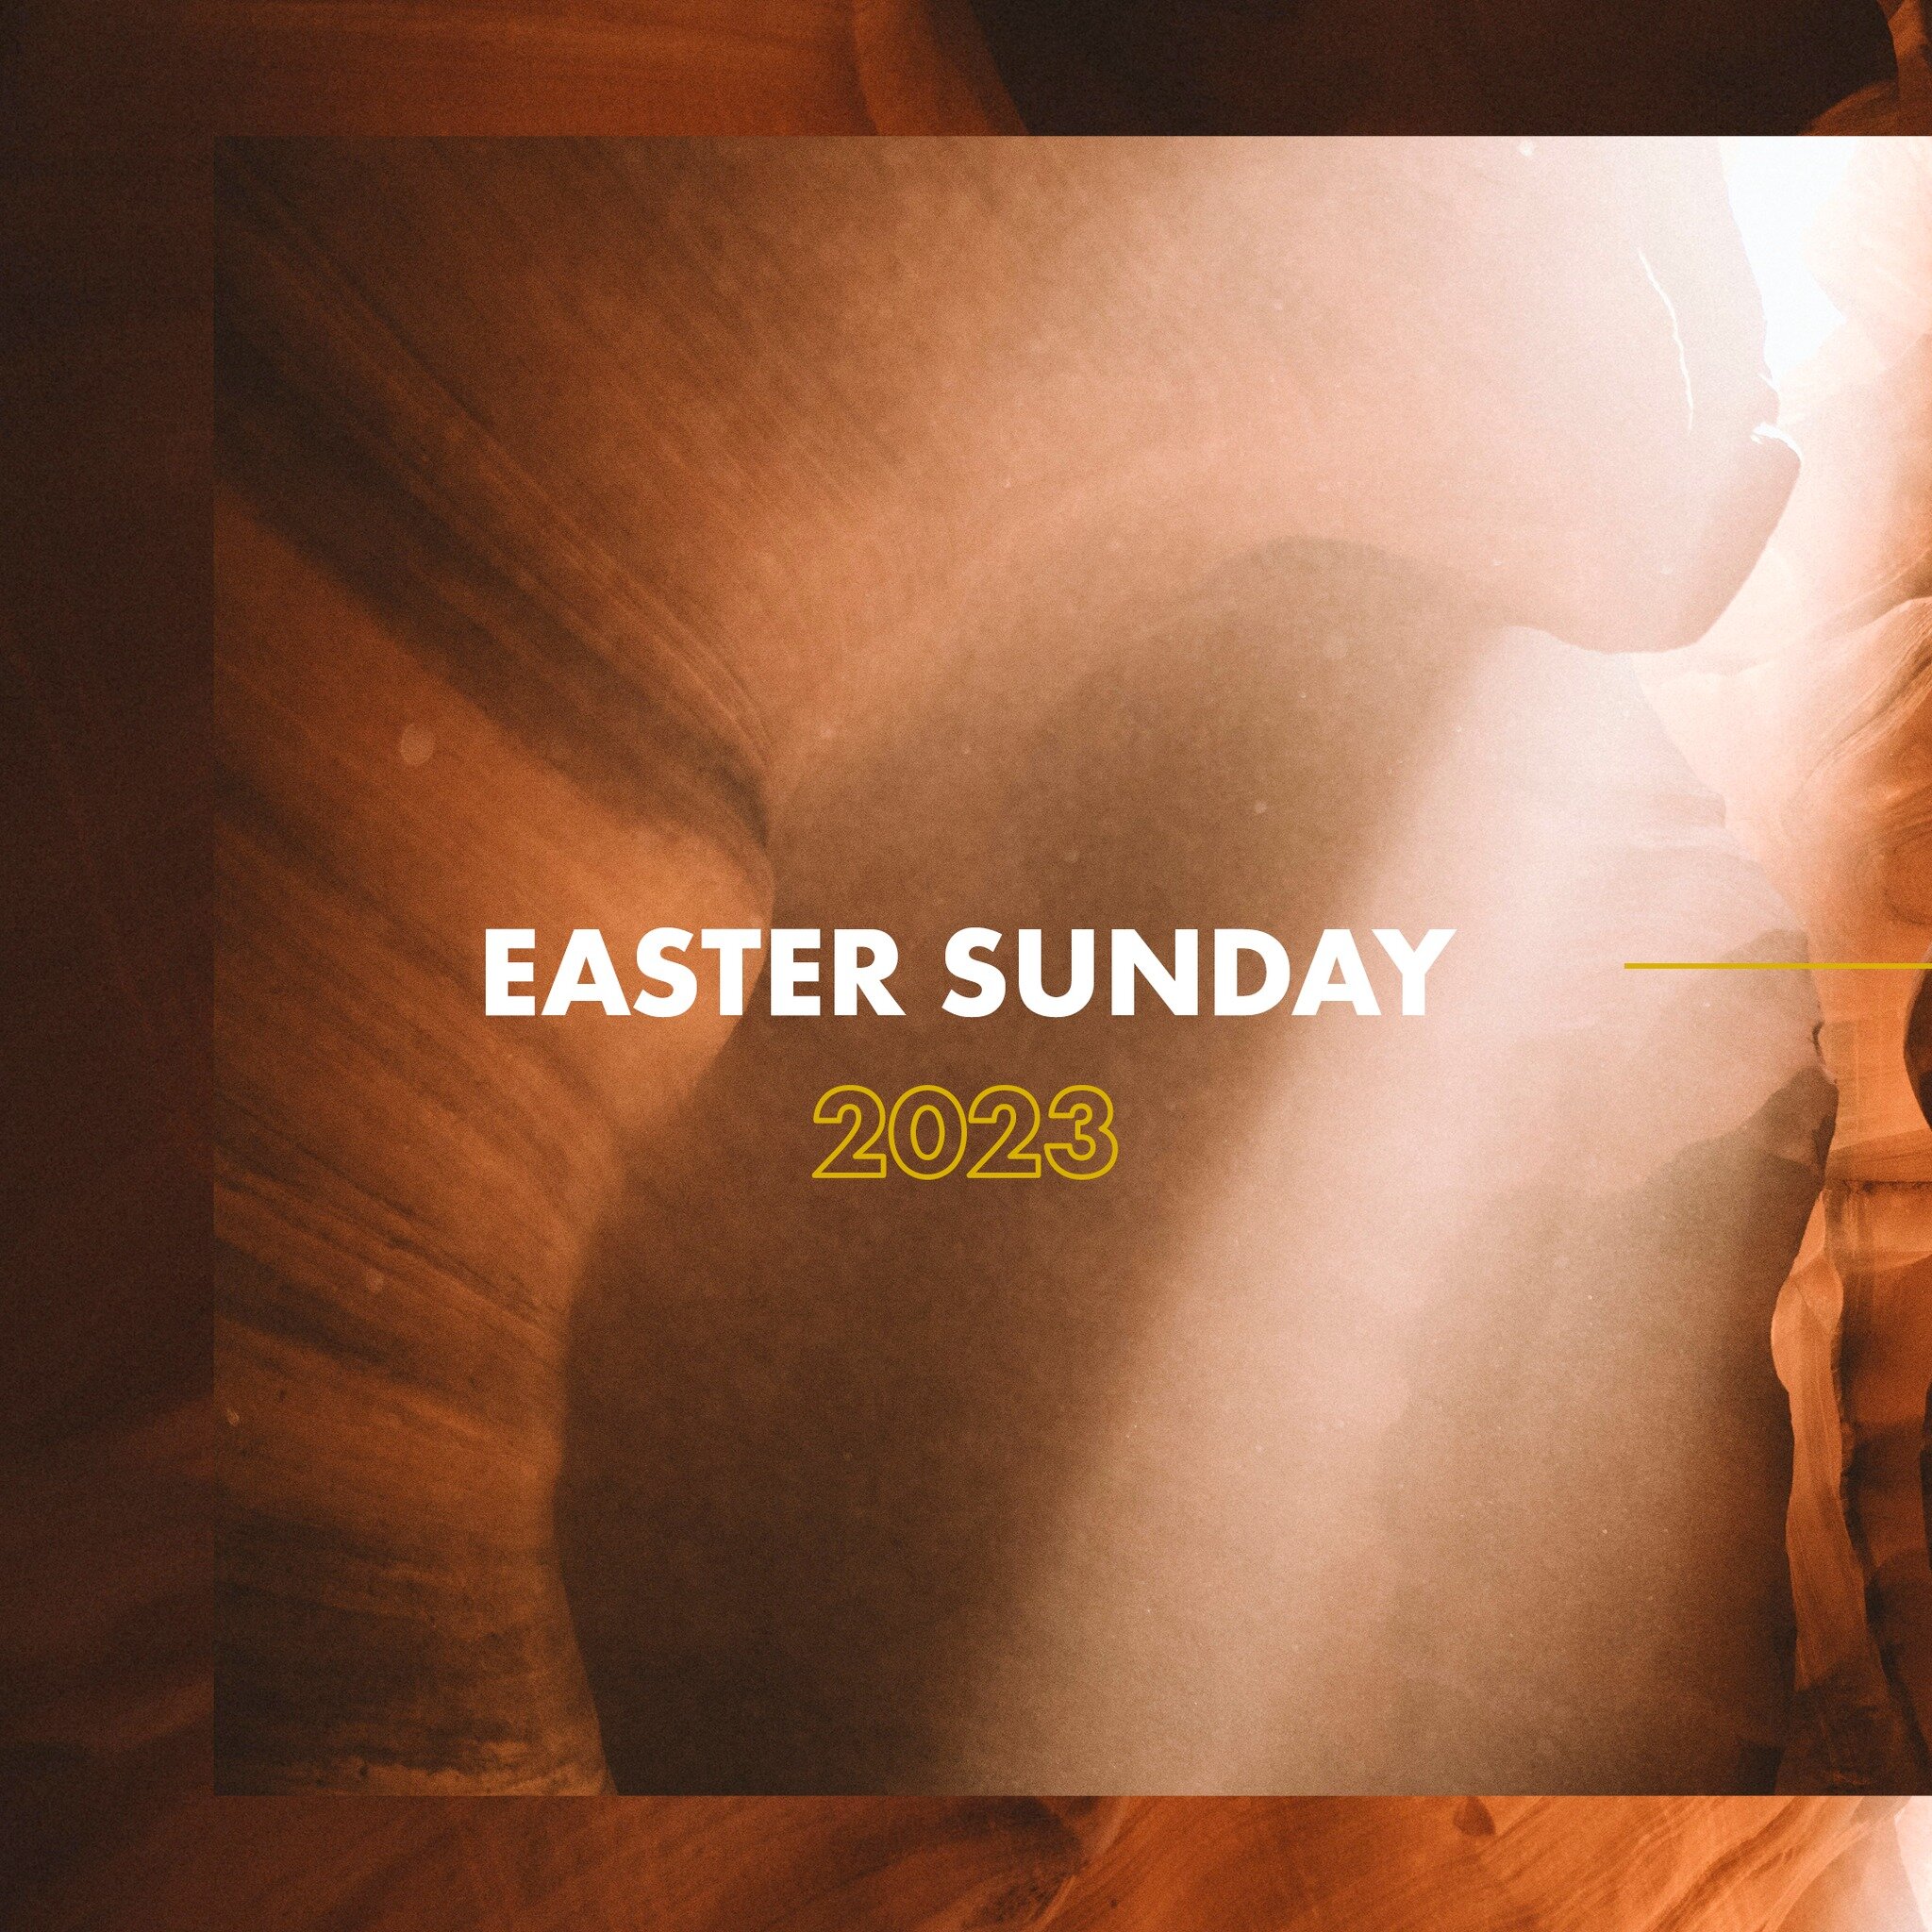 He is risen!
Let's joyfully celebrate the resurrection of our Lord together as we come and worship our triumphant King.